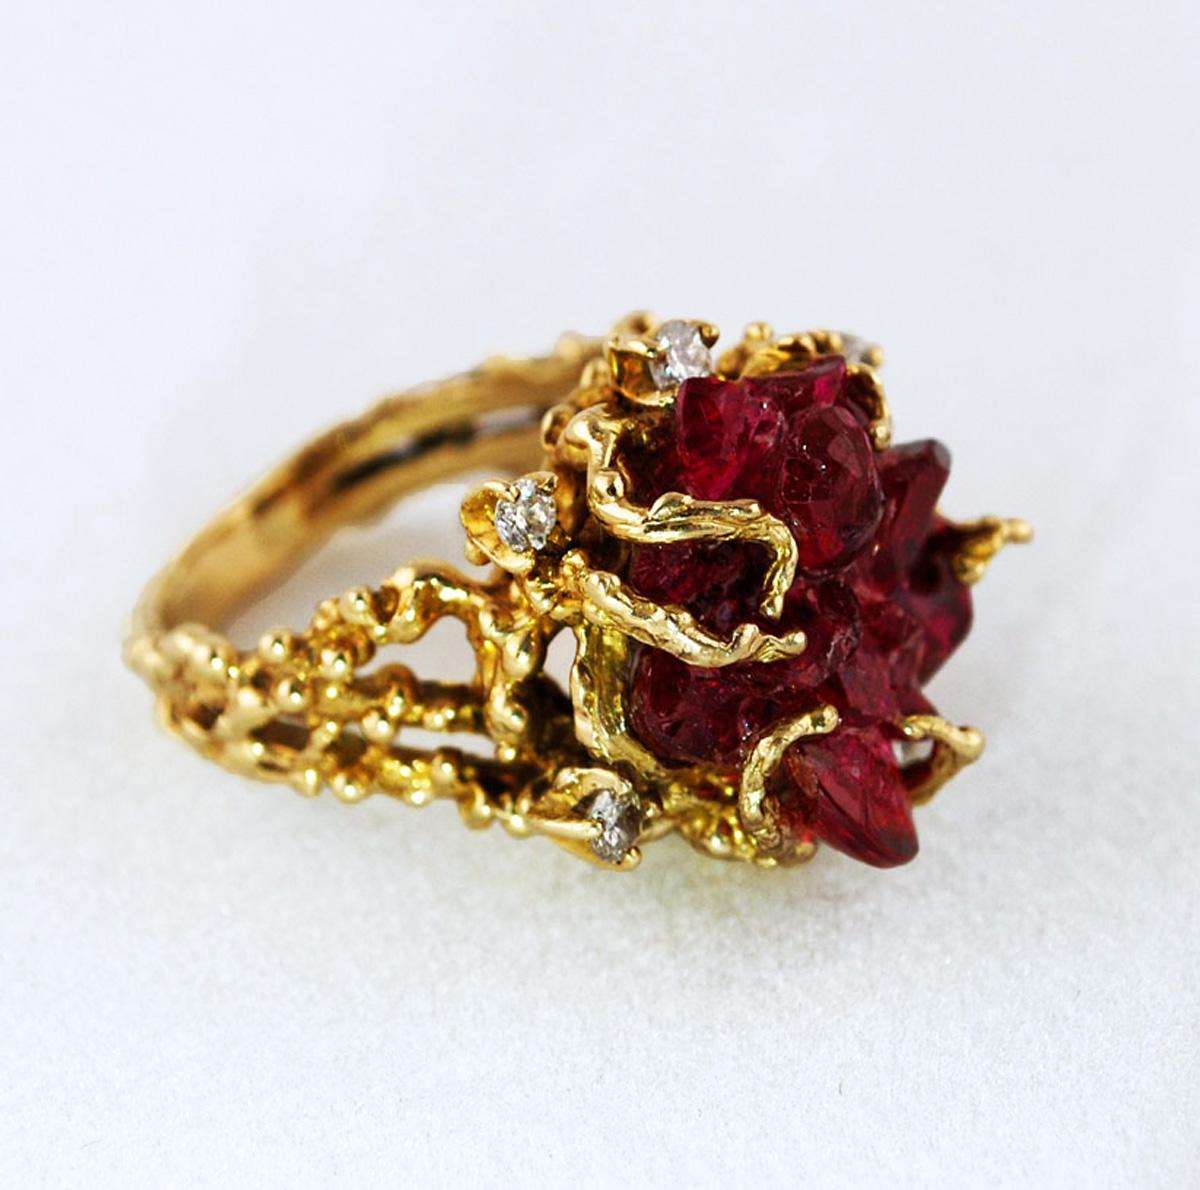 One of the kind bright raw ruby-type chatham crystal in 14K gold castings and diamonds.

The center crystal is approximately 0.6